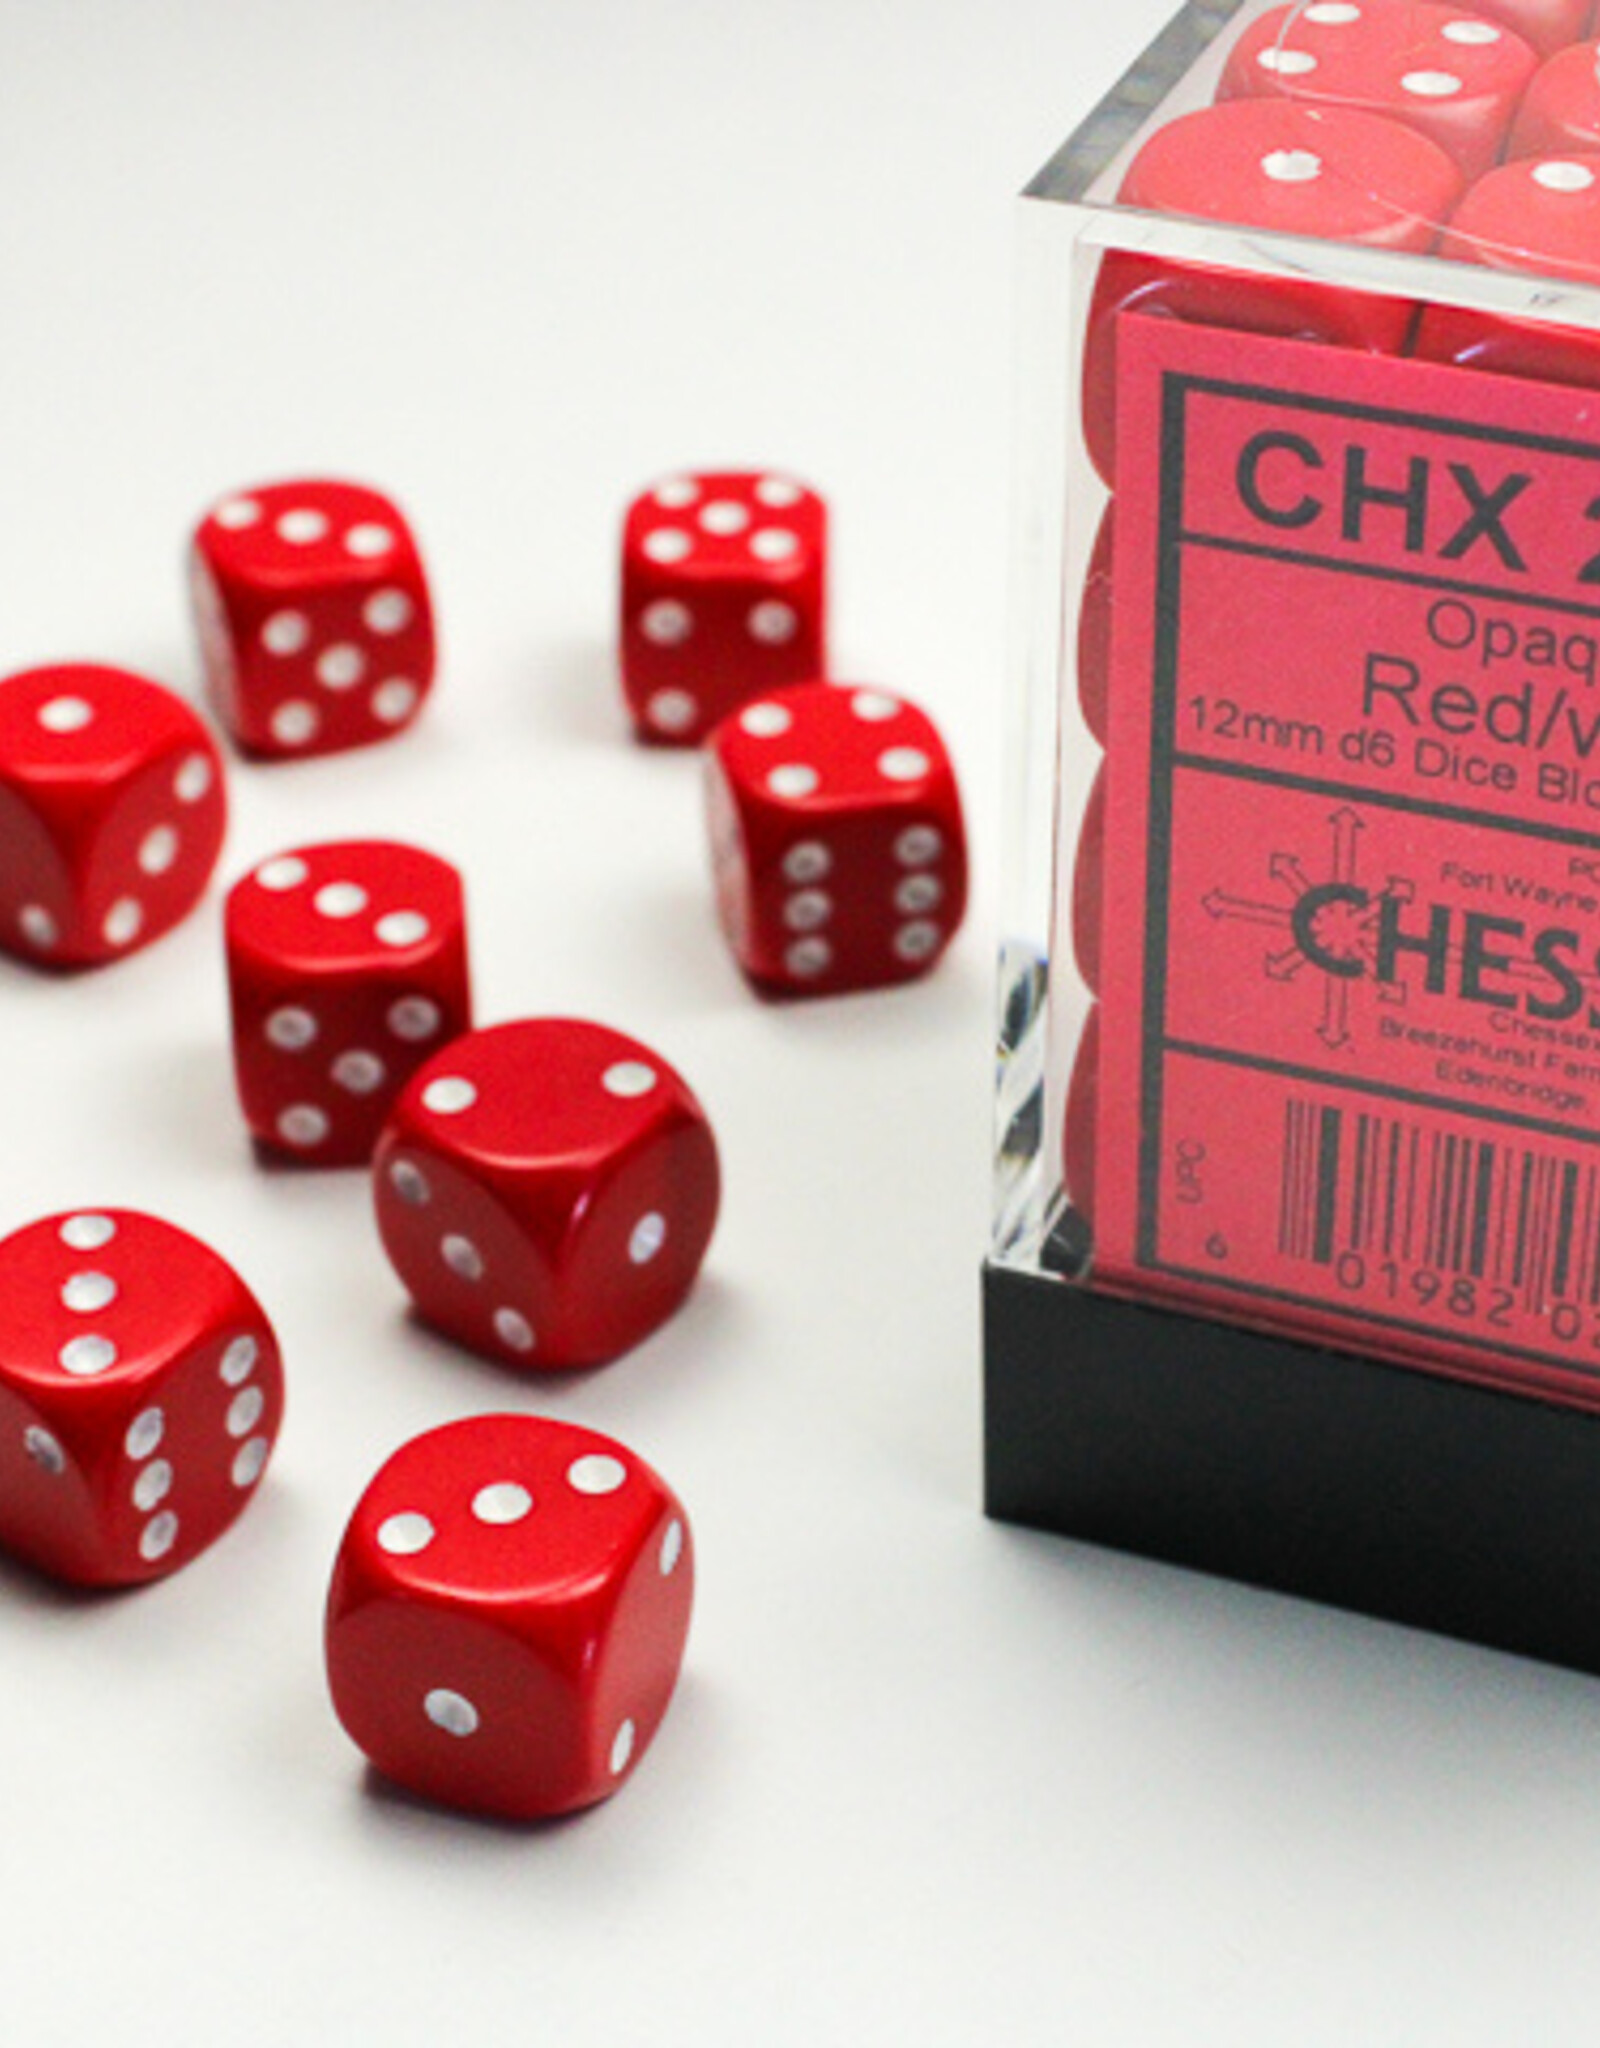 Chessex Chessex 36 x D6 Set Opaque 12mm - Red/White